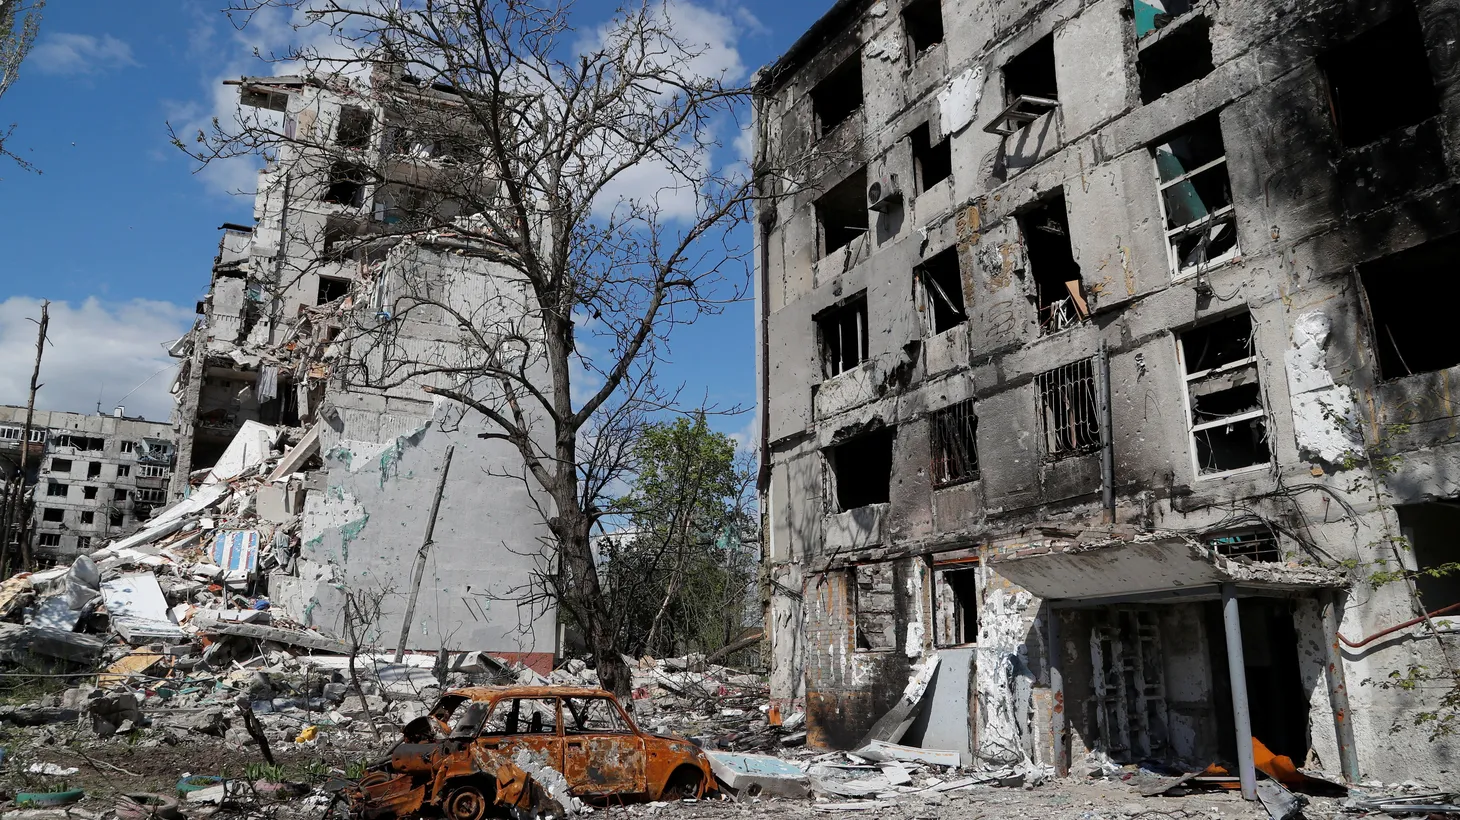 A view shows apartment buildings heavily damaged during the Ukraine-Russia conflict in the southern port city of Mariupol, Ukraine, April 28, 2022. Picture taken April 28, 2022.